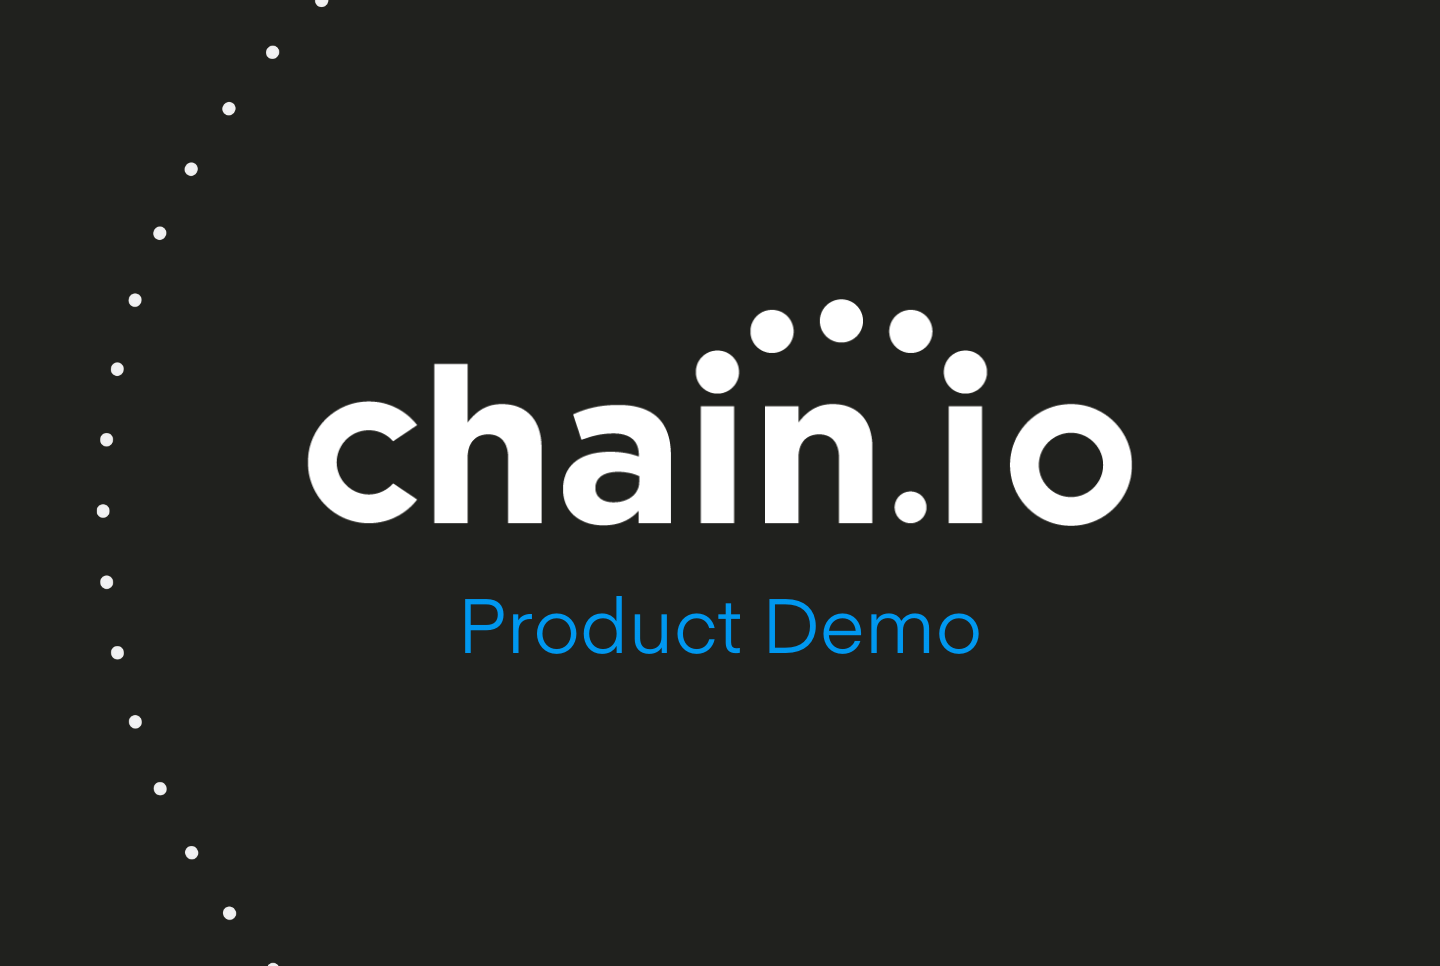 A quick walkthrough of Chain.io and how to setup connectivity between a shipper and a freight forwarder.